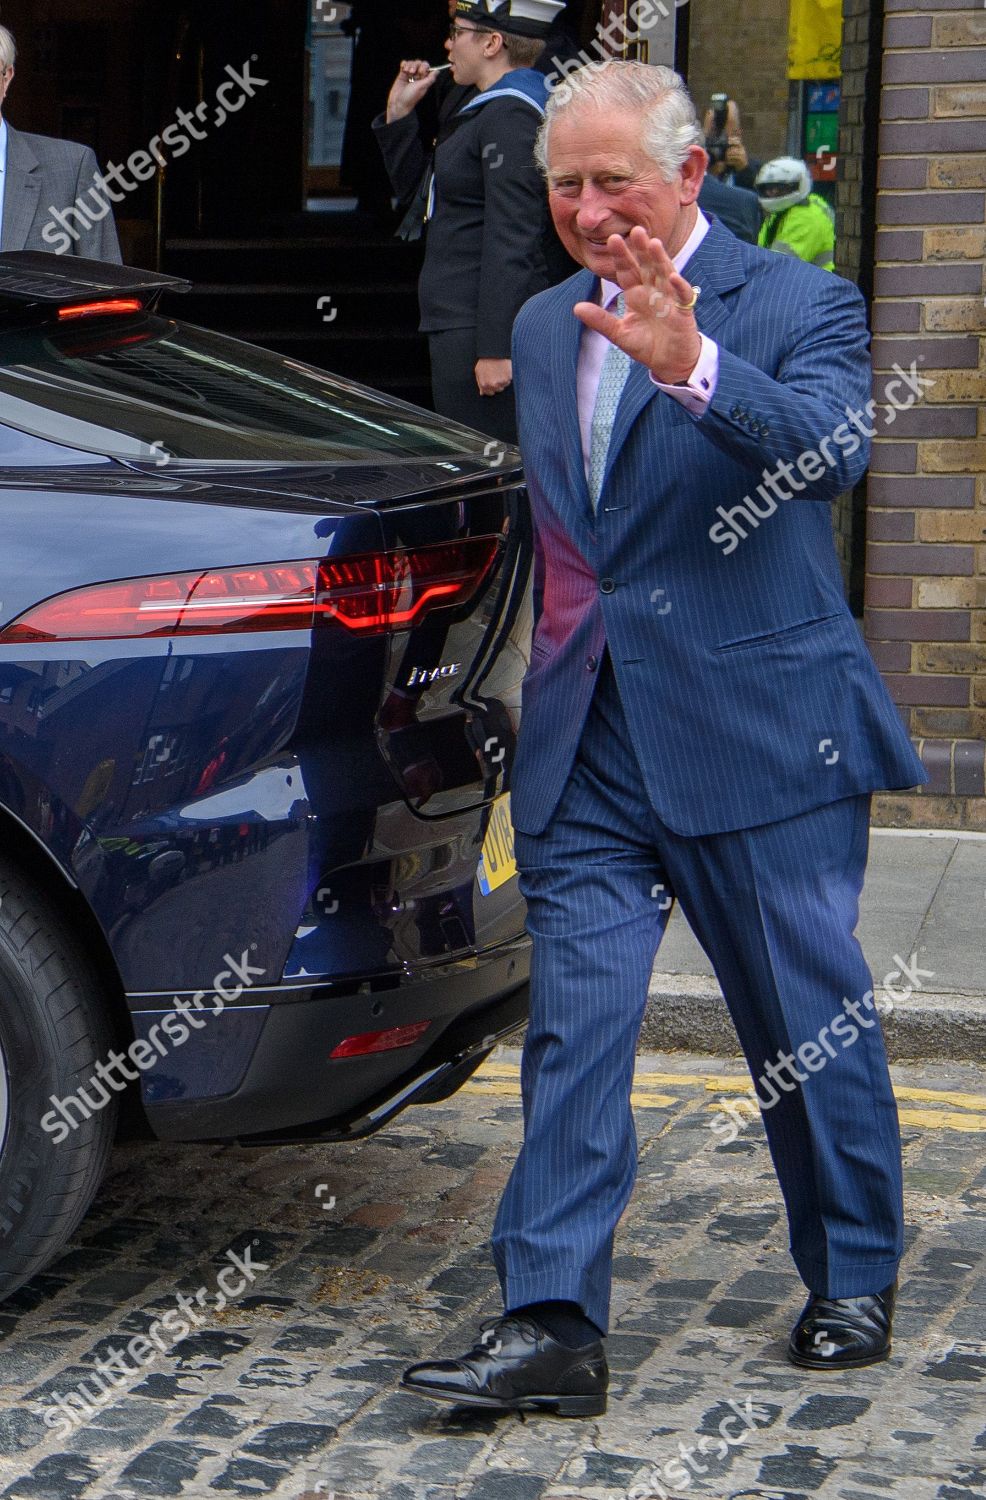 prince-charles-carries-out-royal-engagements-london-uk-shutterstock-editorial-9863246ay.jpg